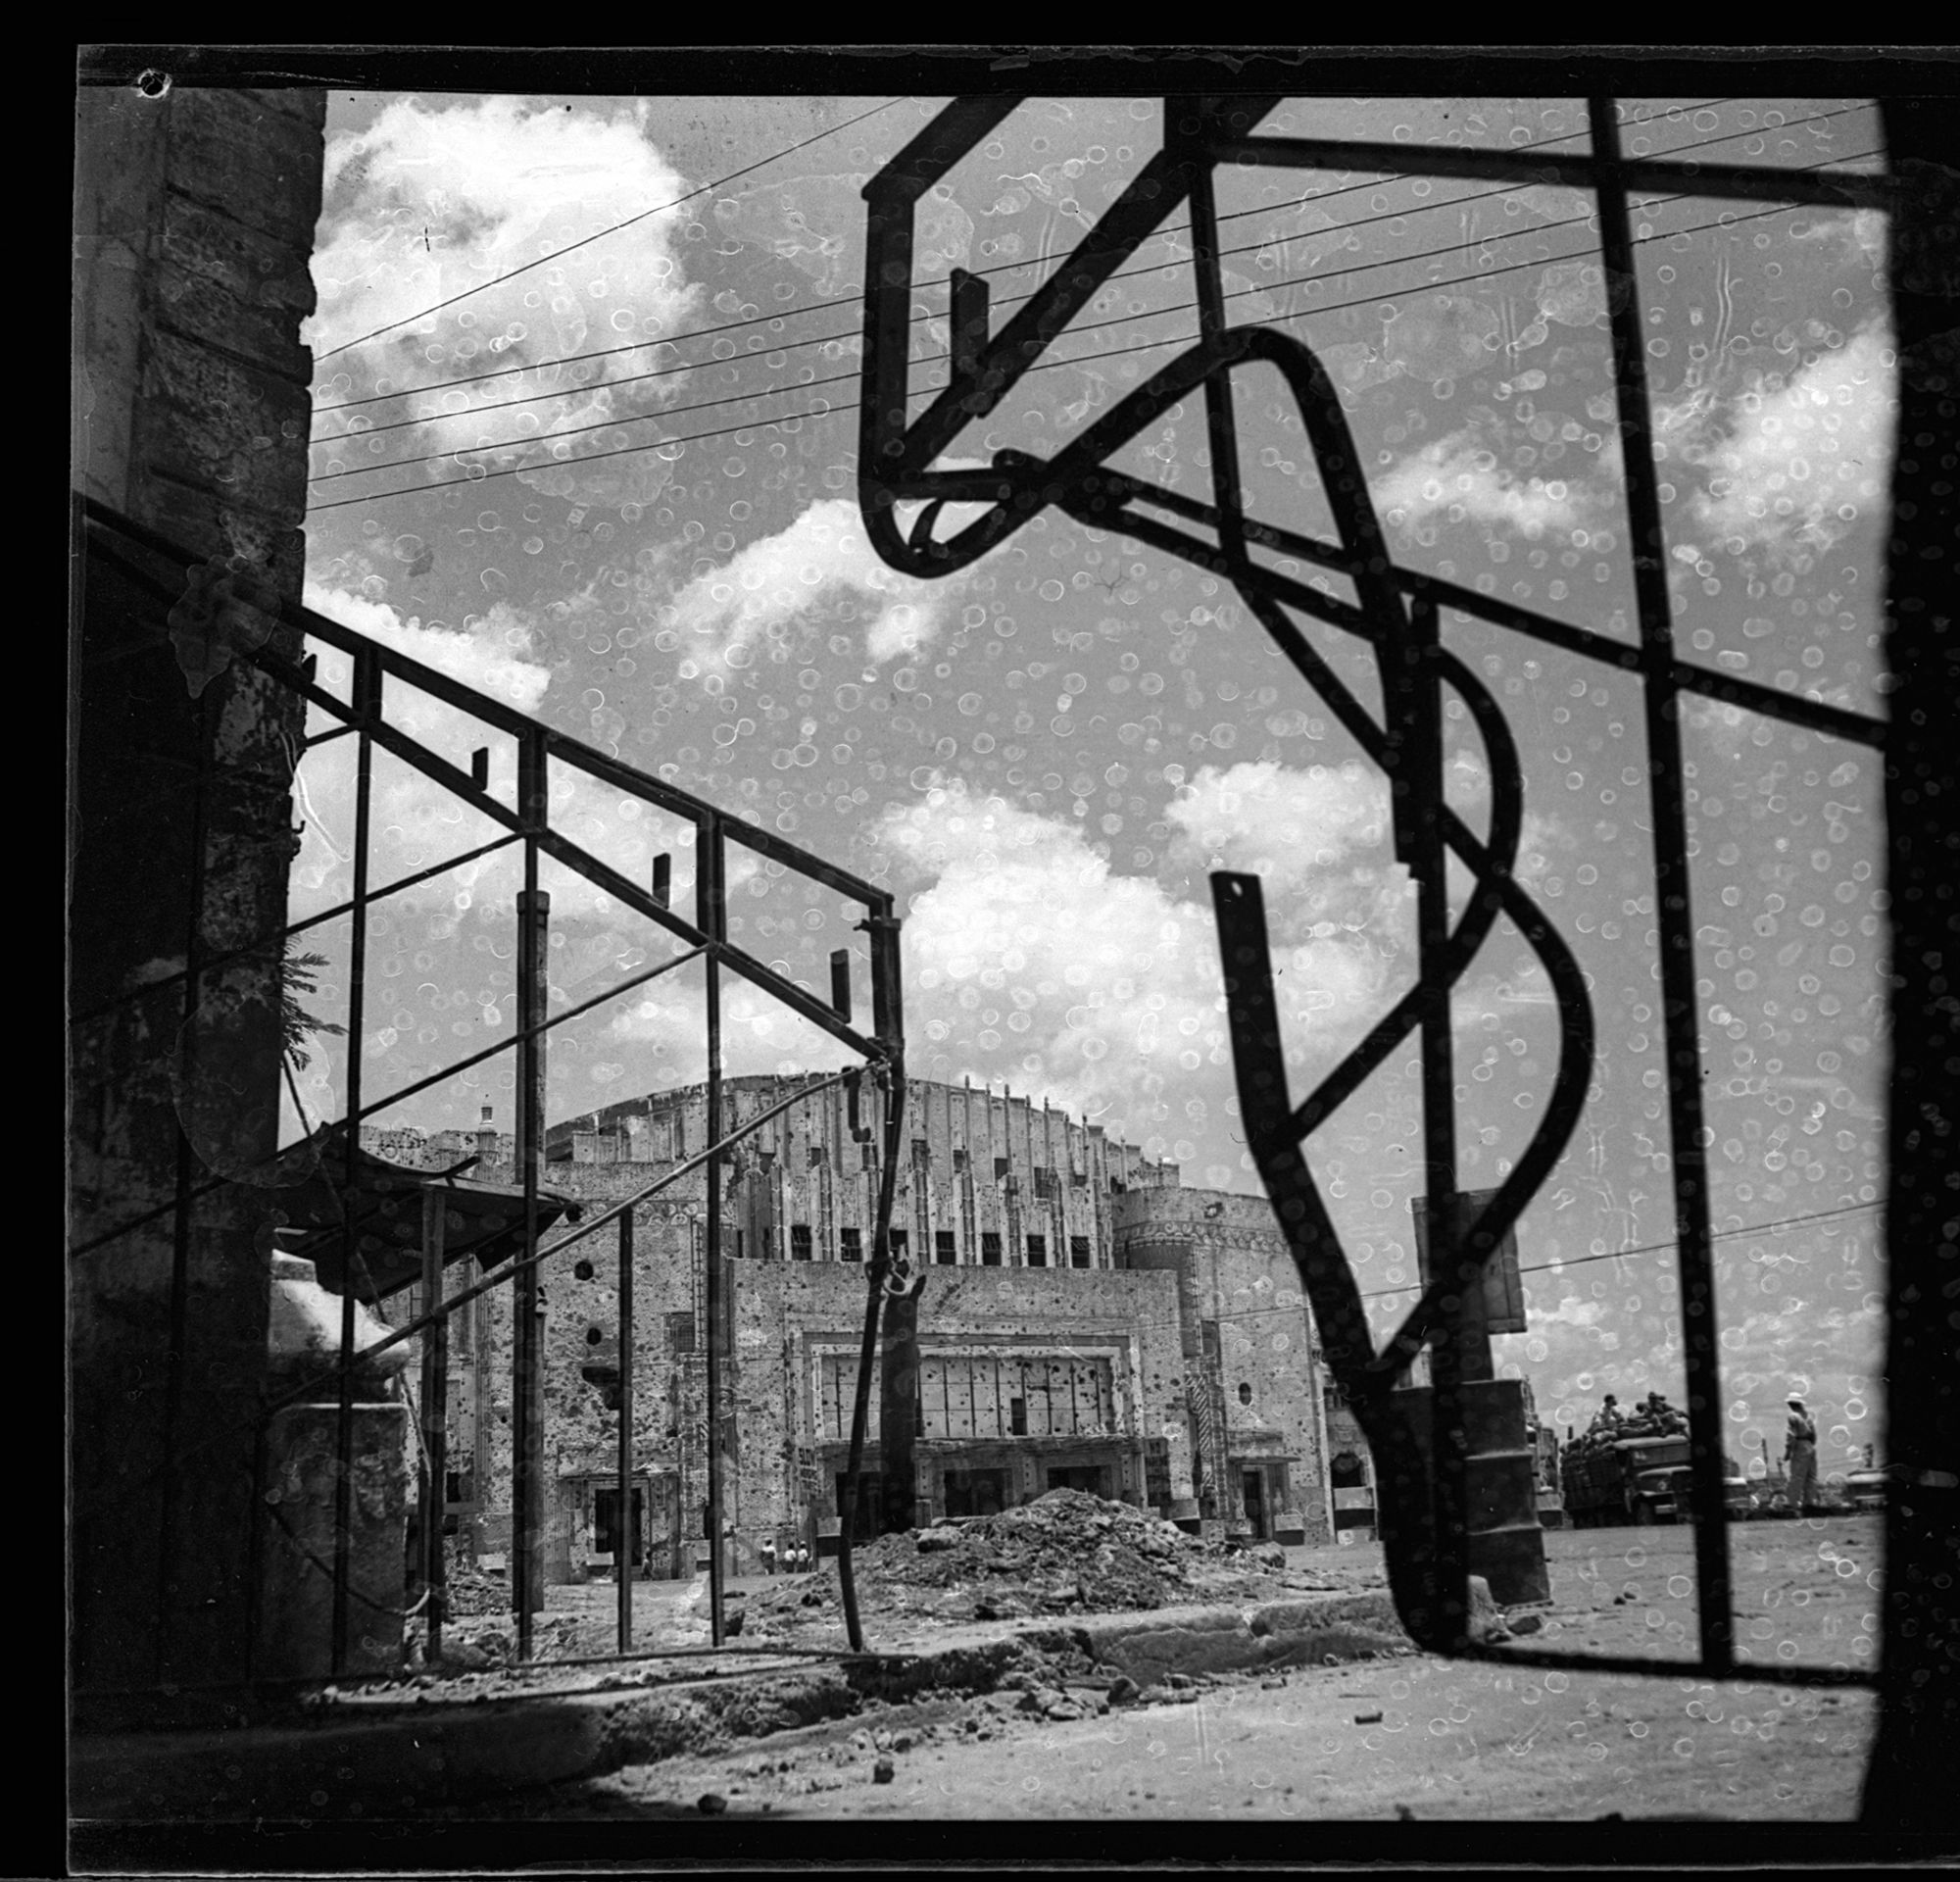 A black-and-white photograph of the Metropolitan Theatre, seen framed through the Insular Ice Plant Gate. To the right, the Gate is more twisting than to the left. There are white circular squiggles on the image that is presumably from film degradation.